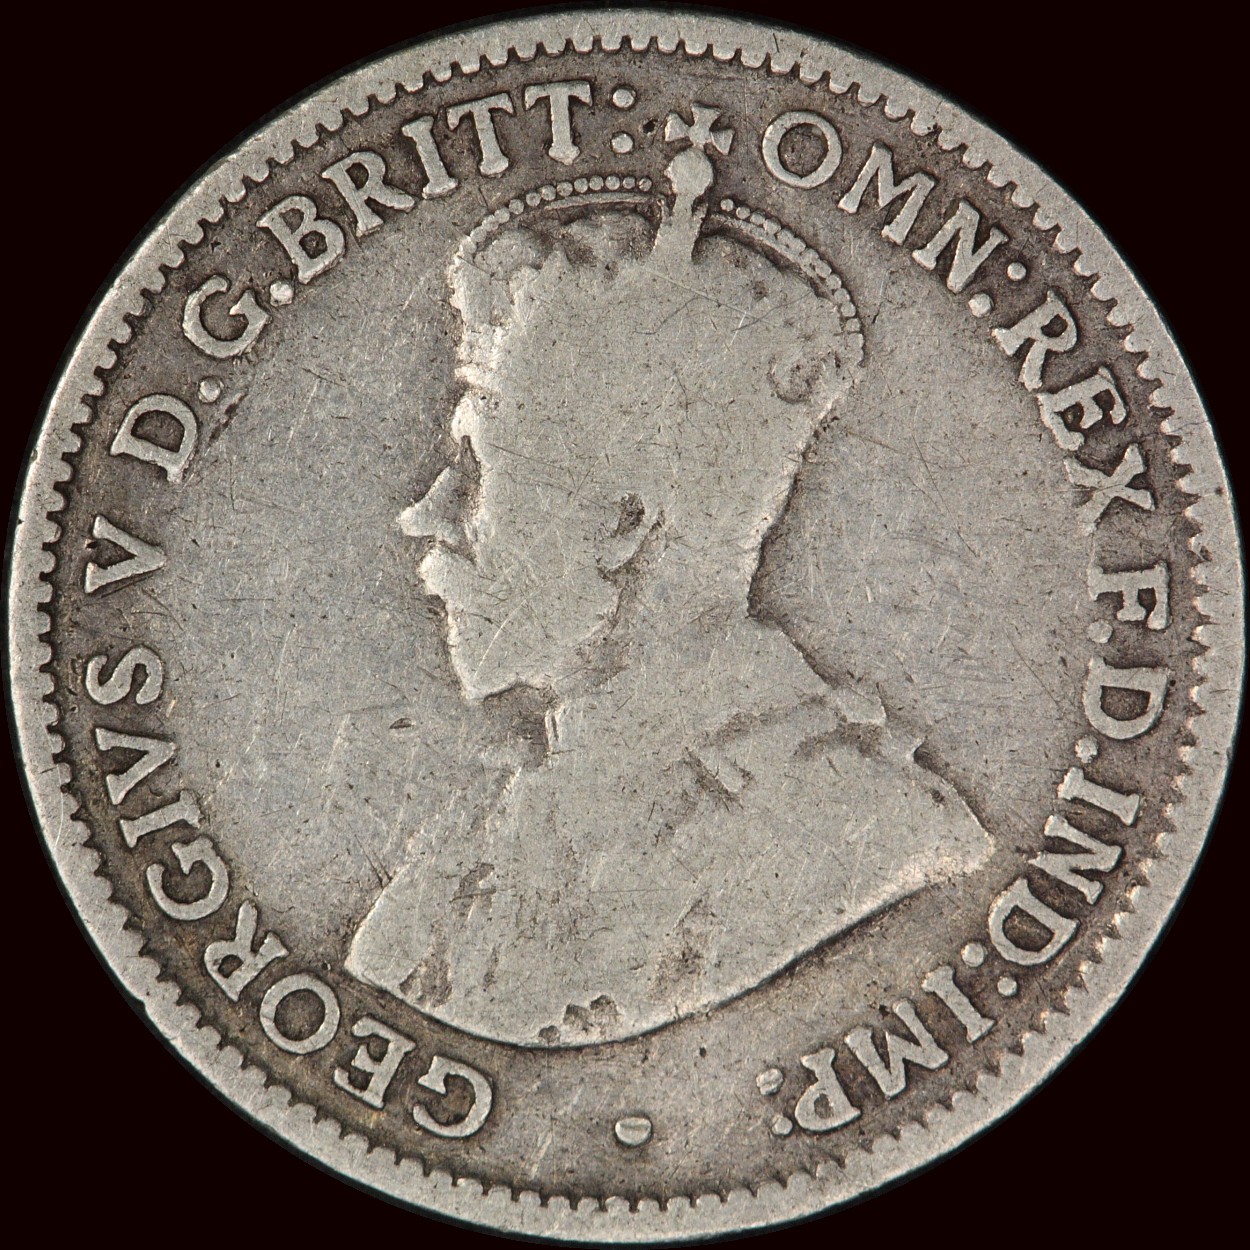 The 1922/1 Overdate Threepence - Australia's Rarest Silver Commonwealth Coin